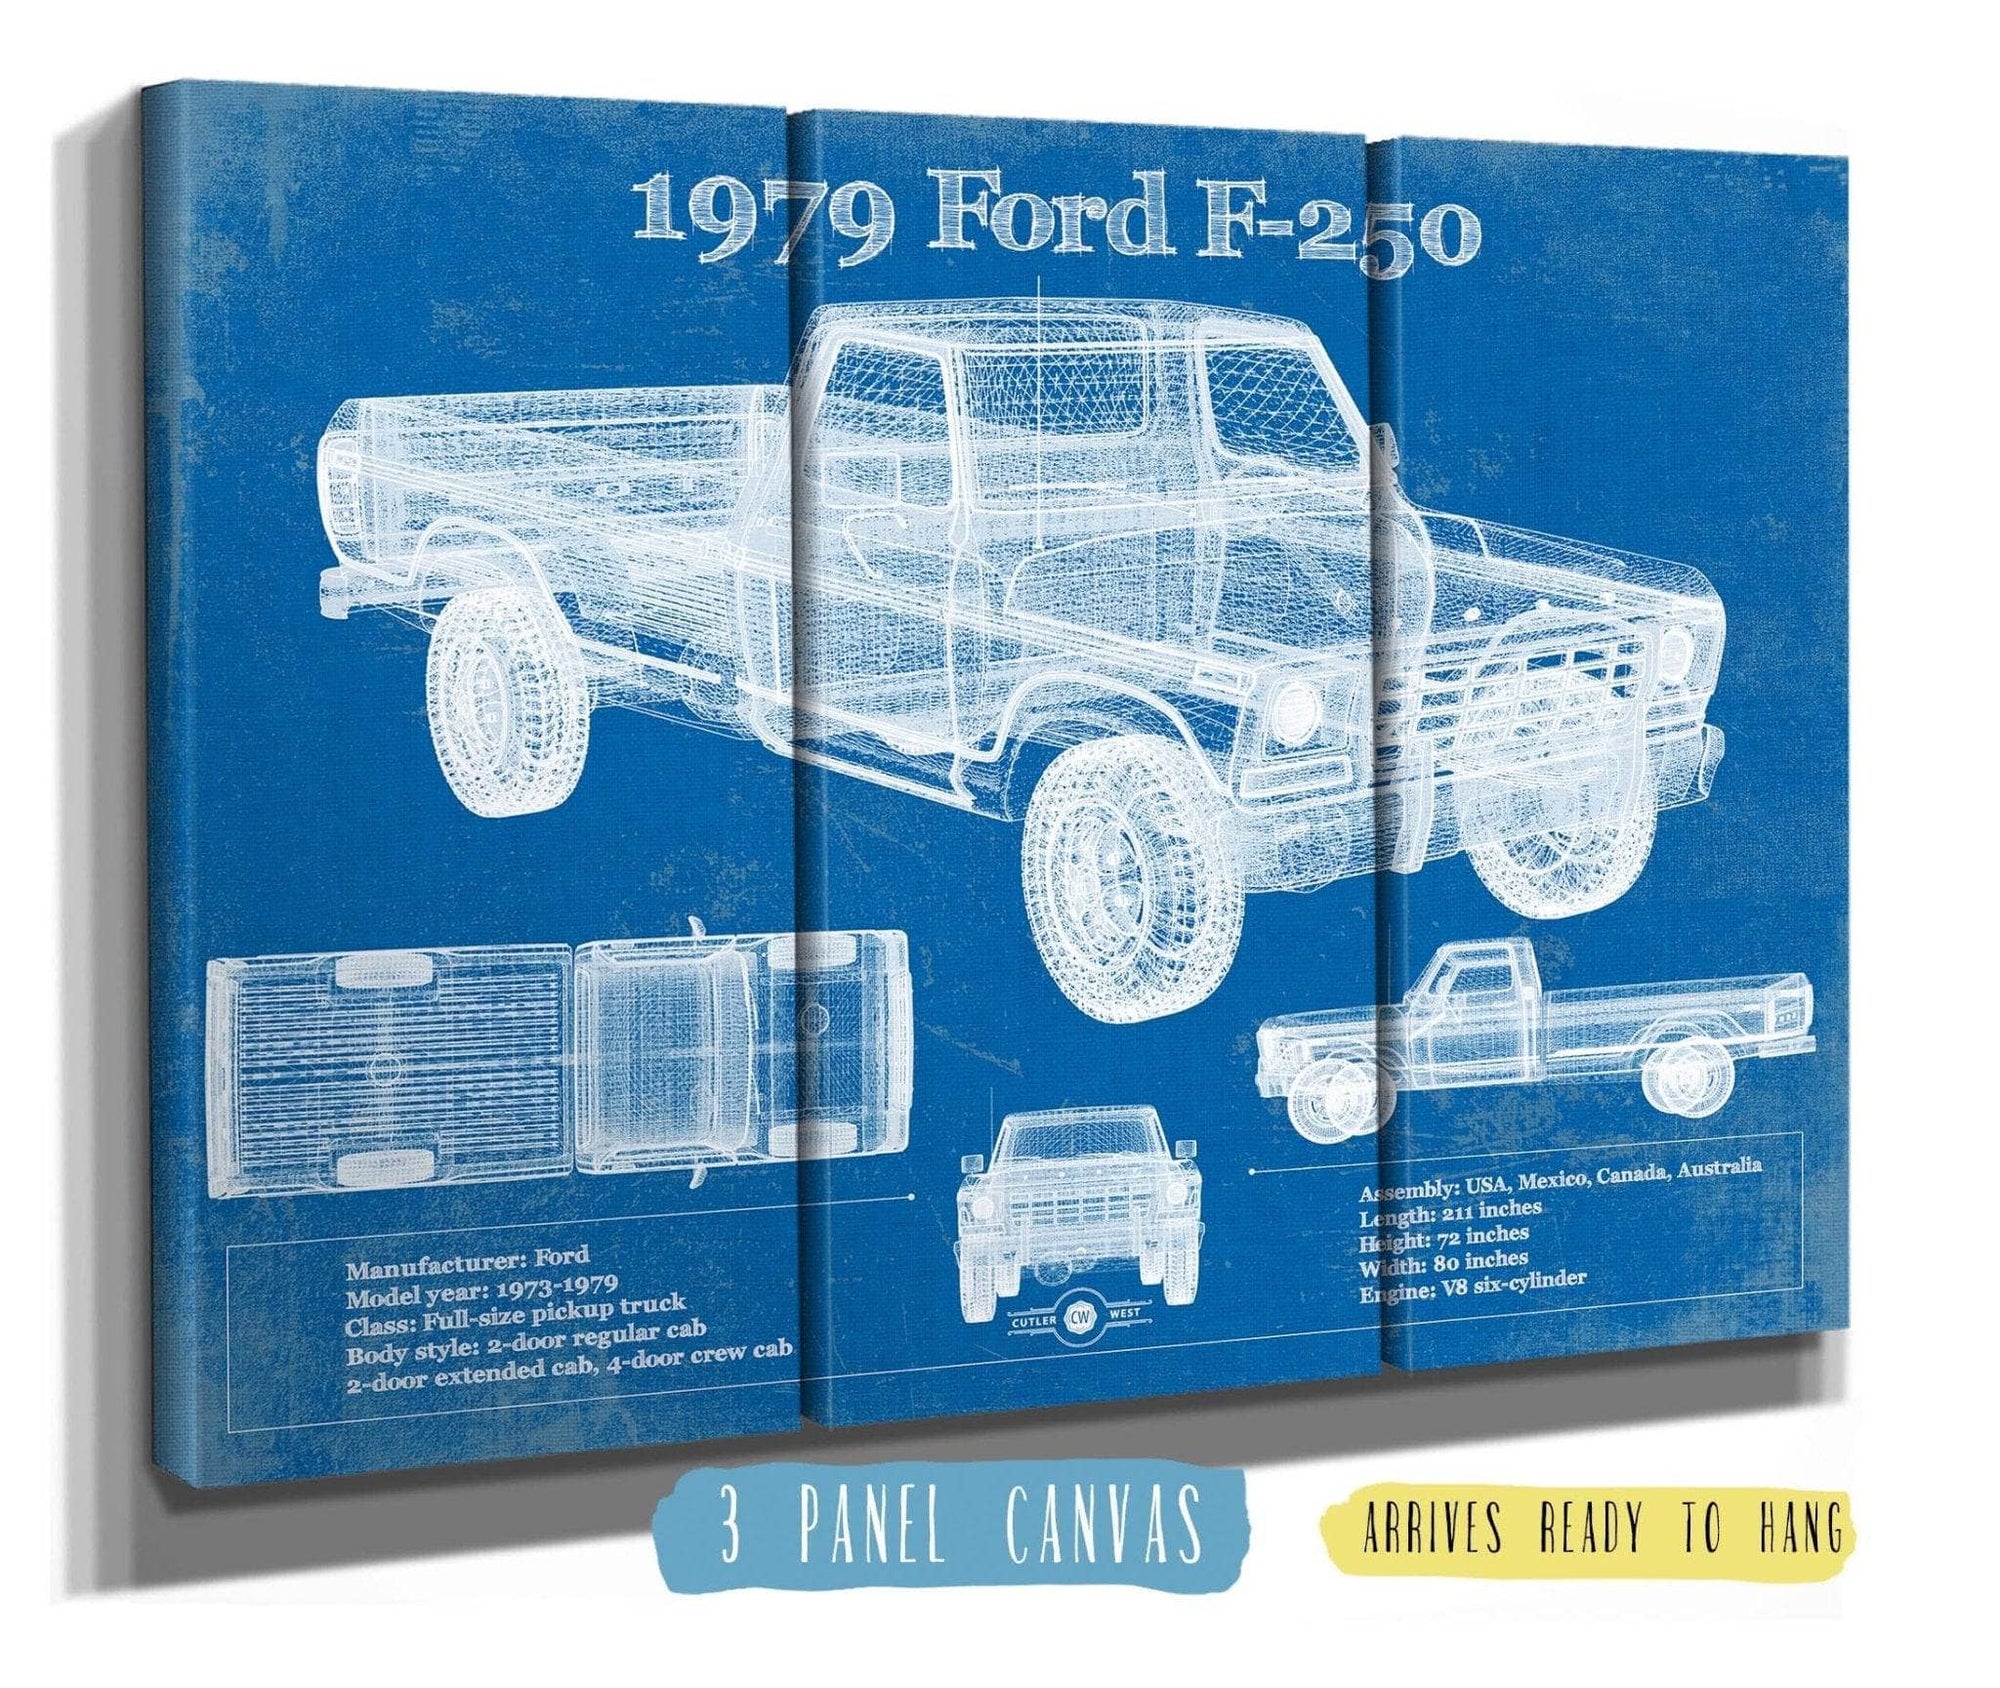 Cutler West Ford Collection 48" x 32" / 3 Panel Canvas Wrap 1979 Ford F 250 Vintage Blueprint Auto Print 933311117_41461